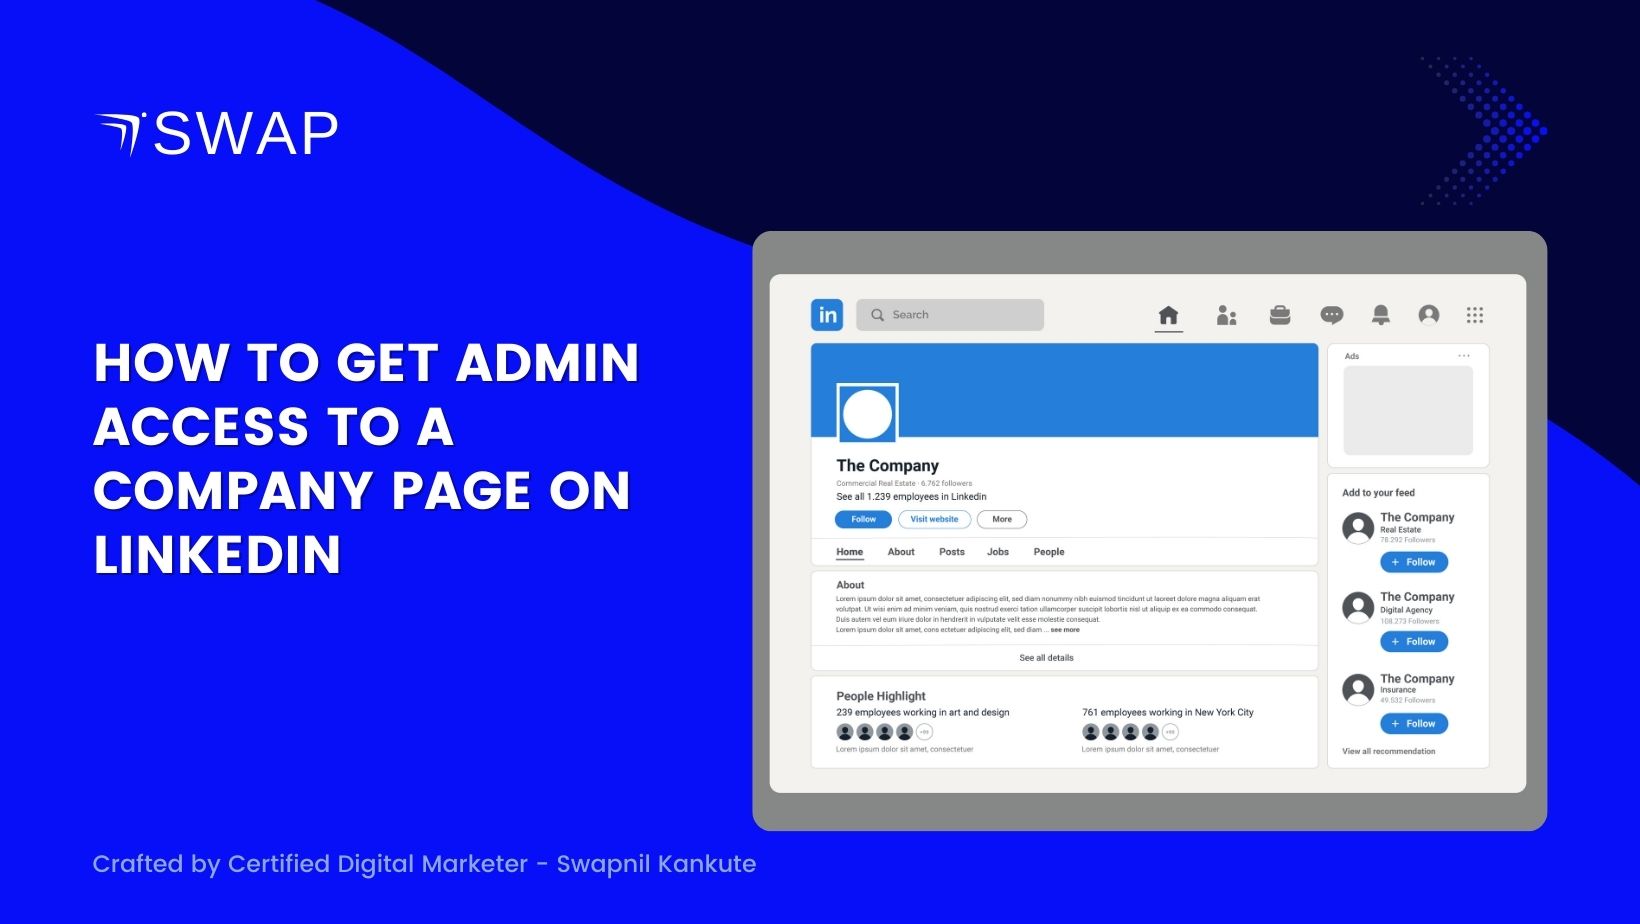 How To Get Admin Access To A Company Page on LinkedIn